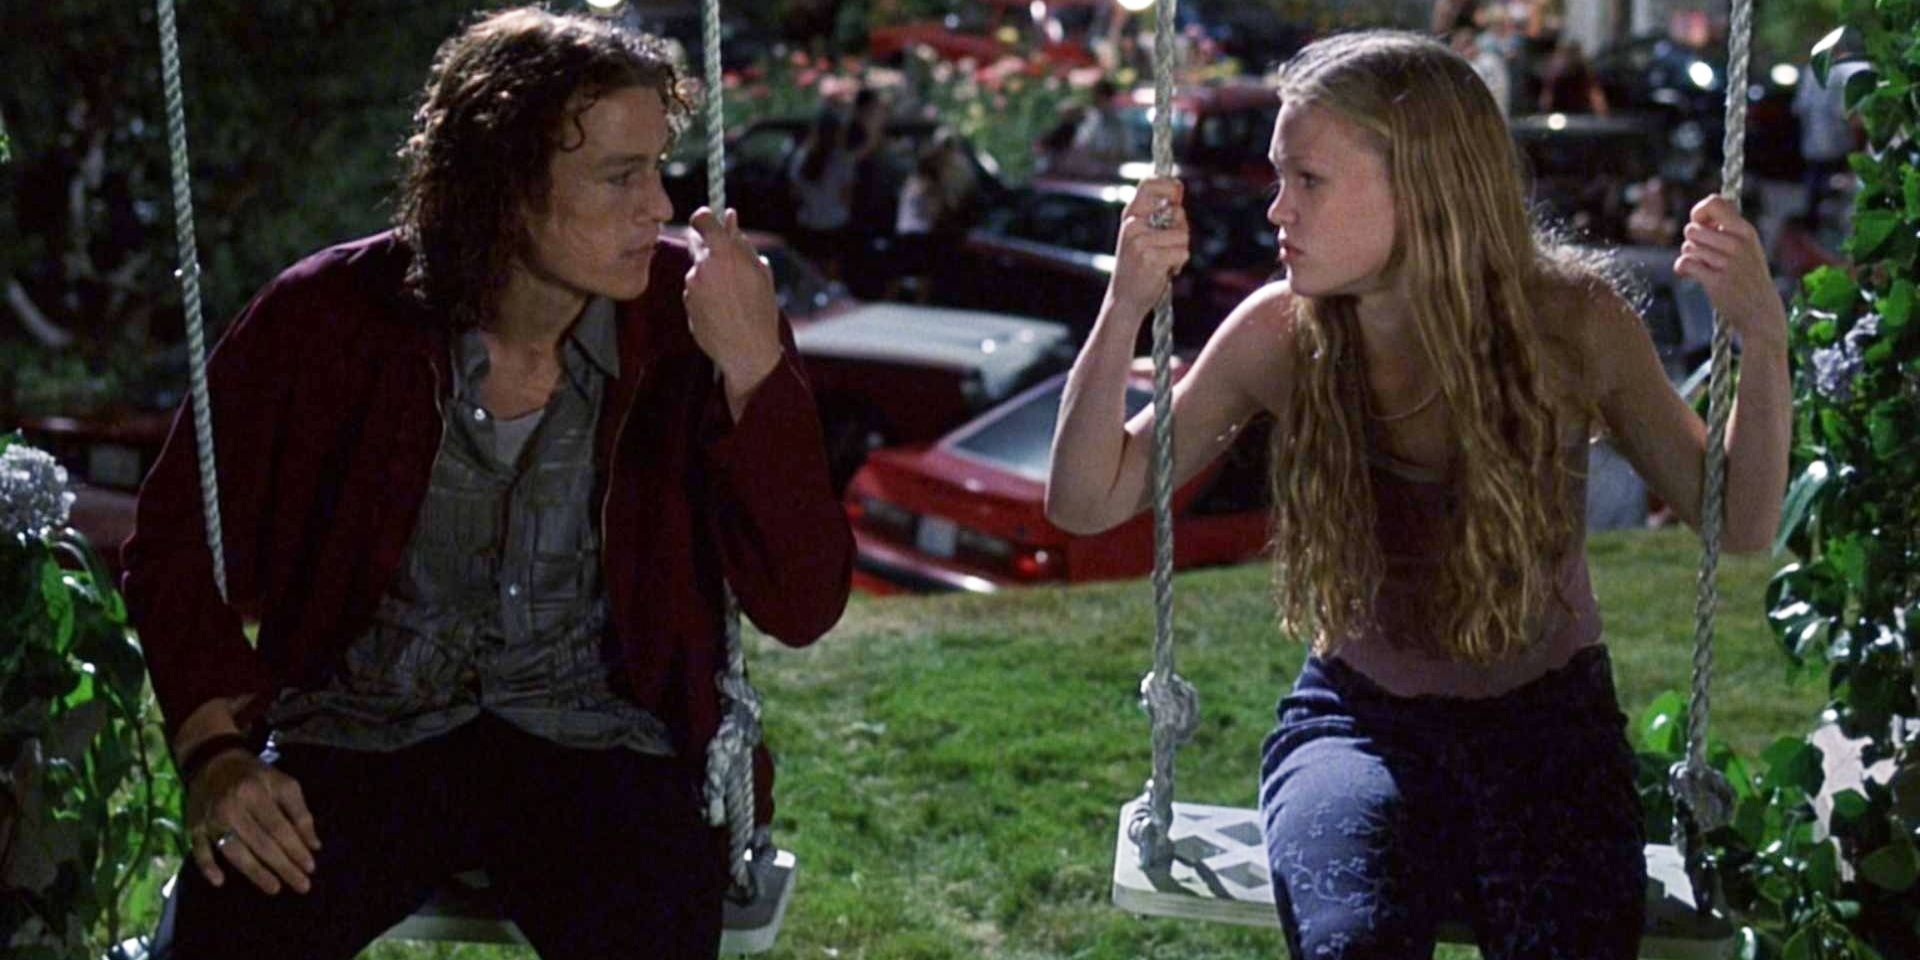 Patrick and Kat talk while sitting on swings in 10 Things I Hate About You.